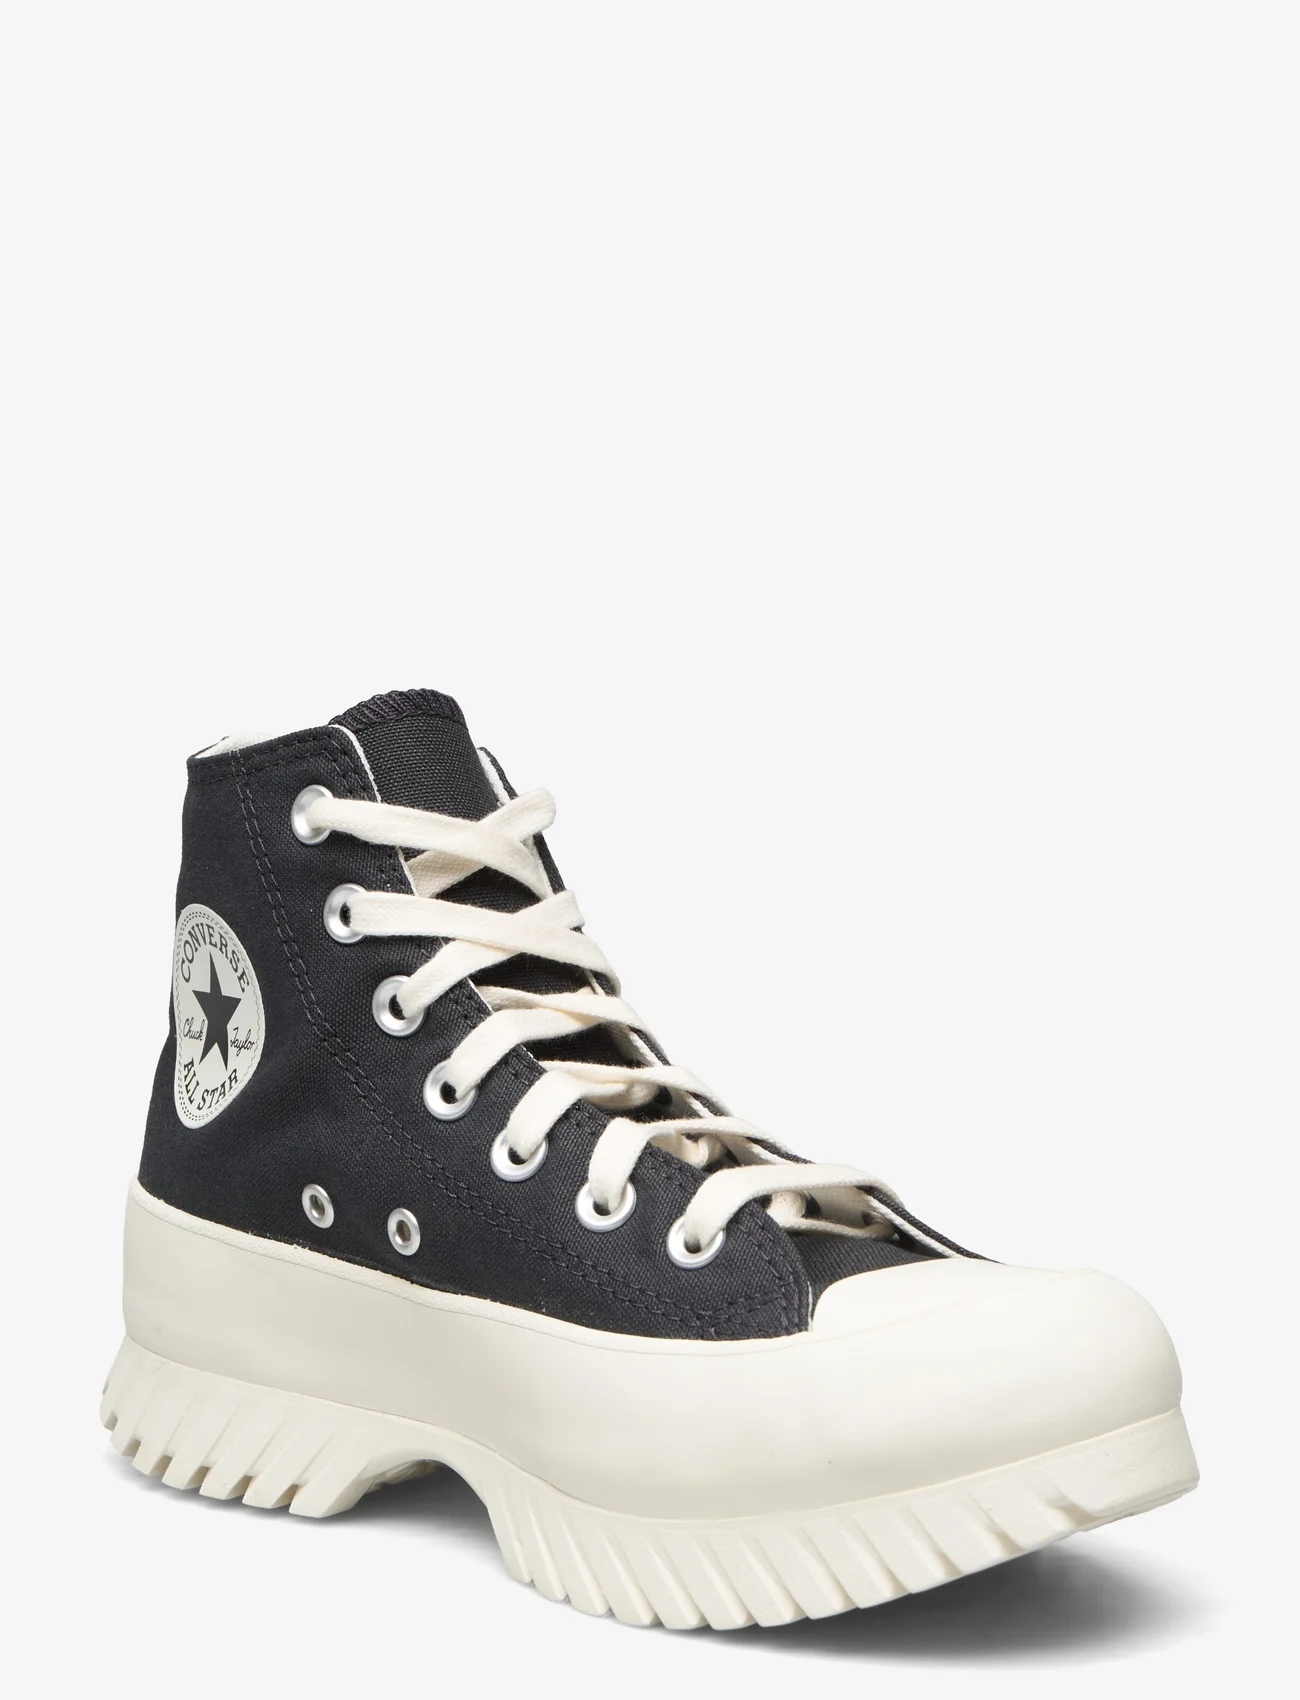 Converse Chuck Taylor All Star Lugged  - High top sneakers 